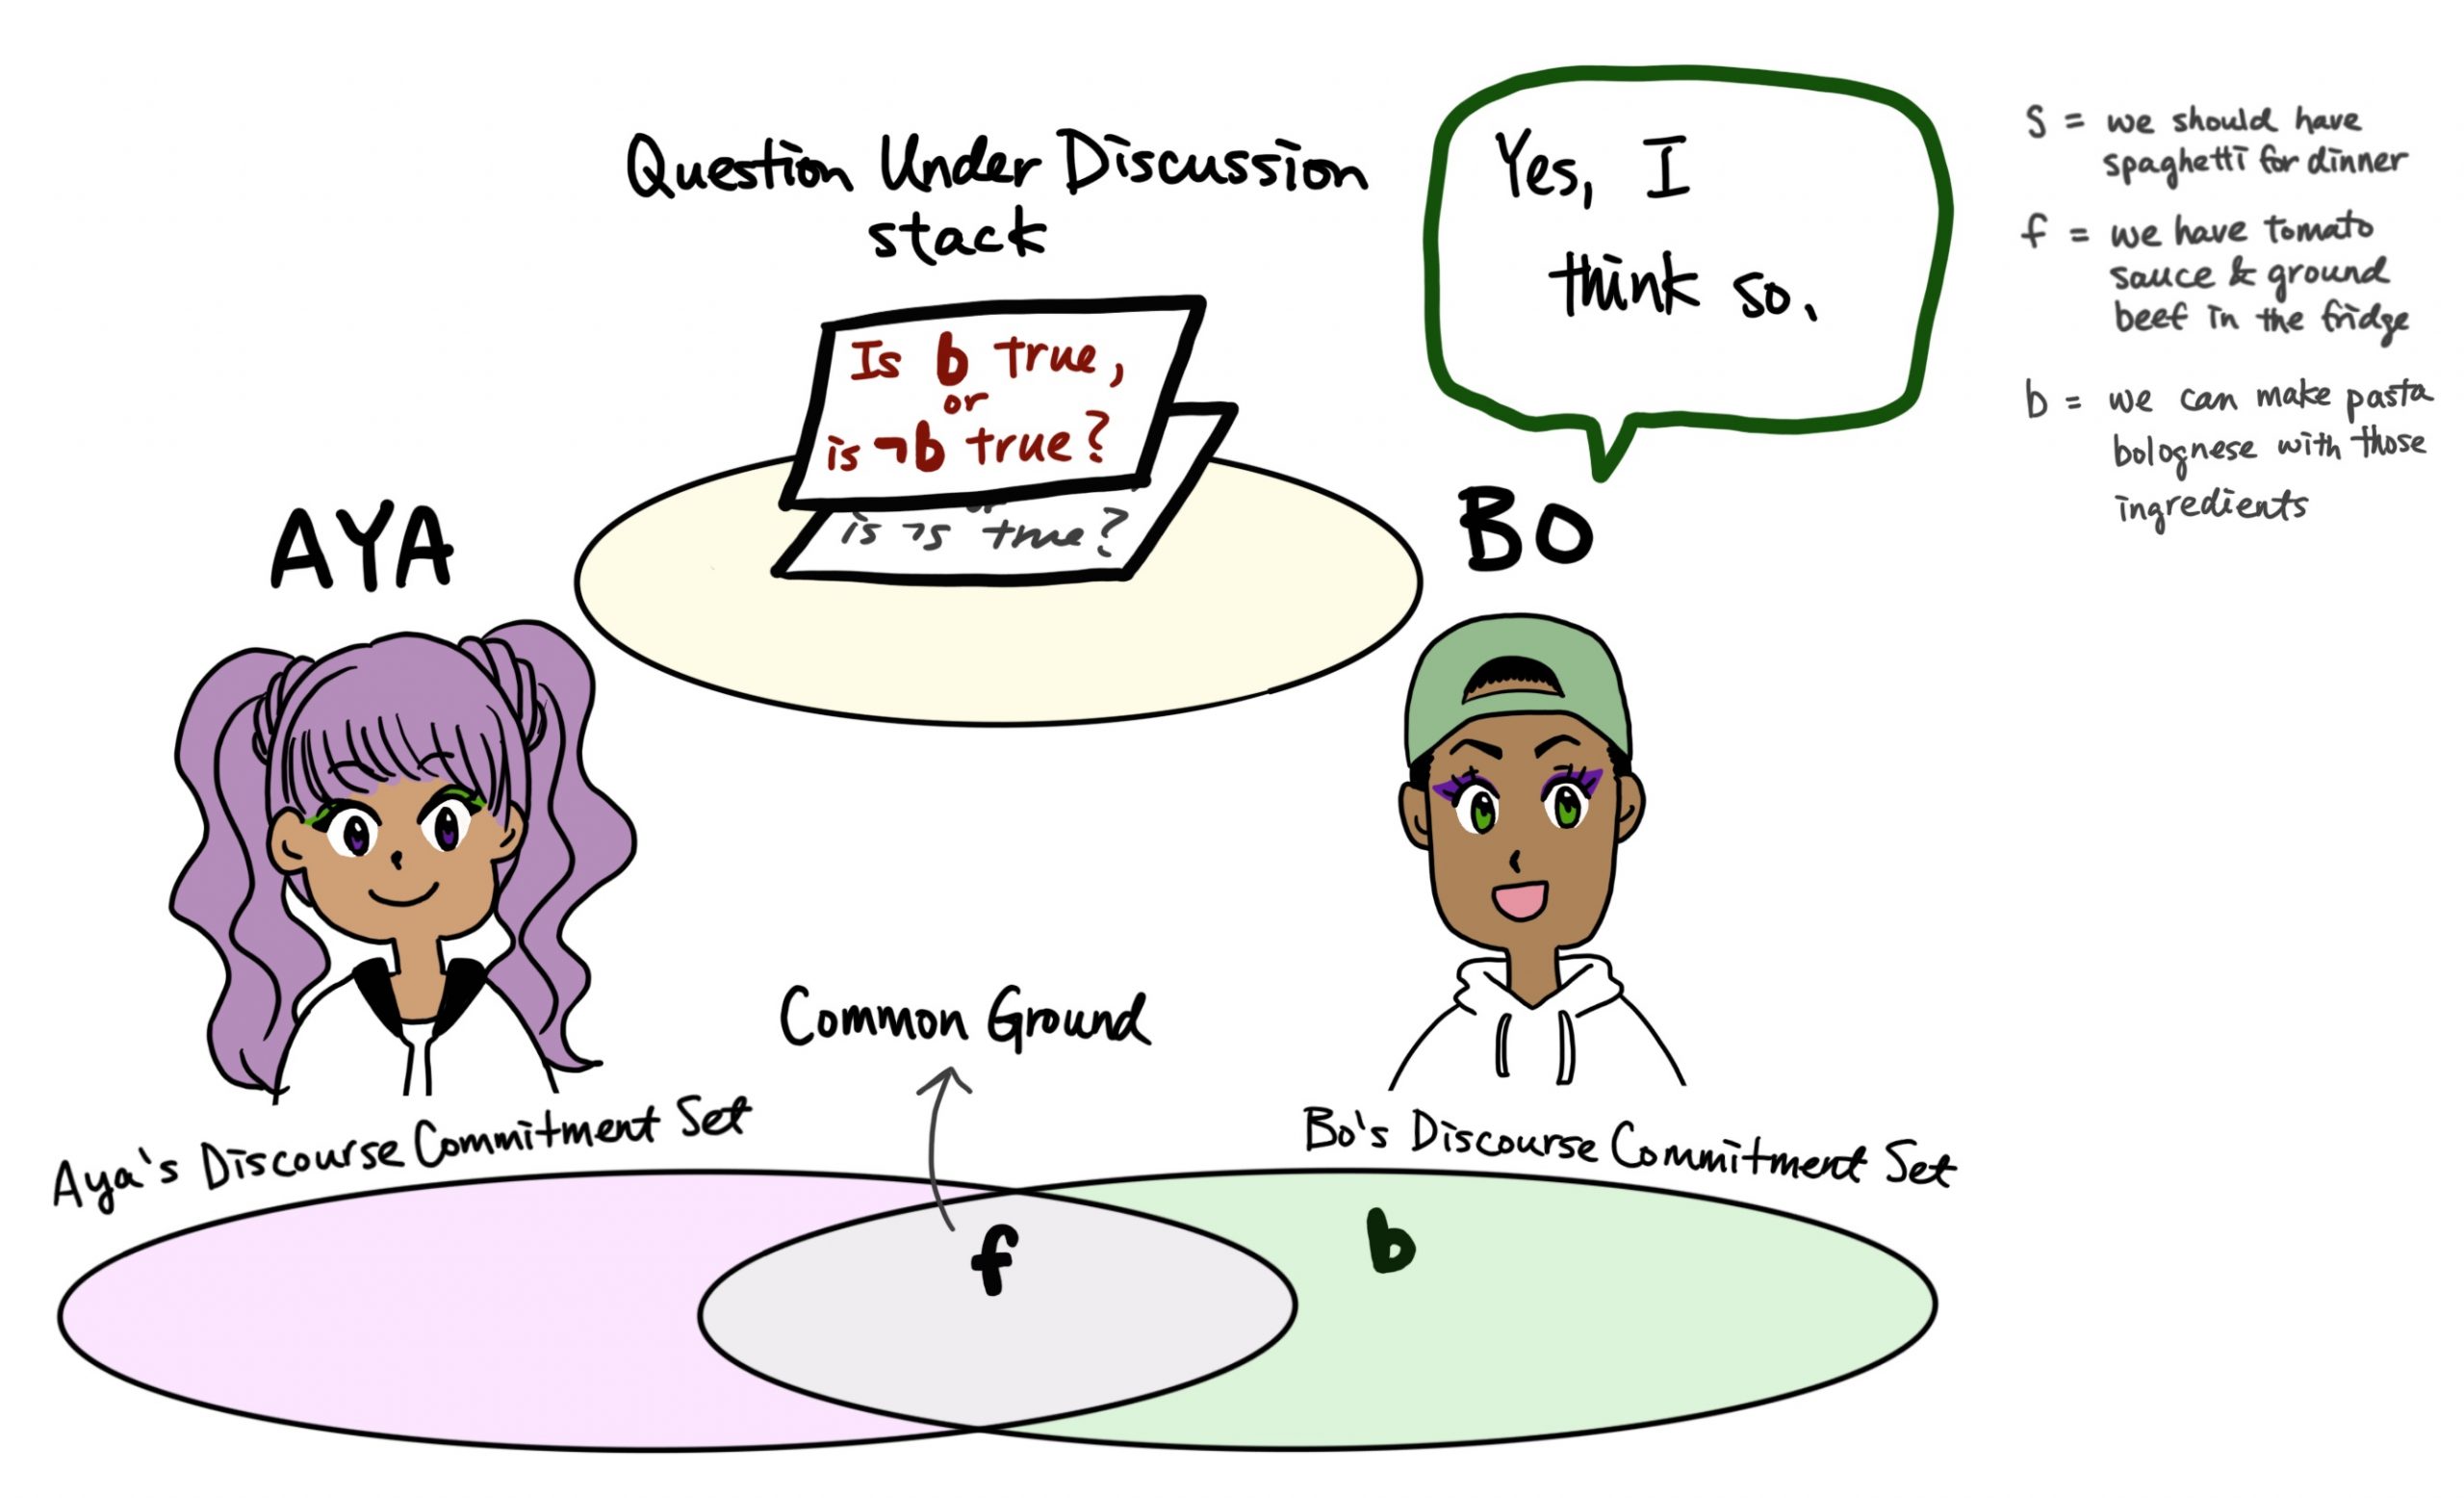 Illustration of the context with Aya and Bo as interlocutors. The illustation shows Aya's and Bo's Discourse Commitment Sets, the Common Ground, and the Question Under Discussion stack. b gets added to Bo's DC set.